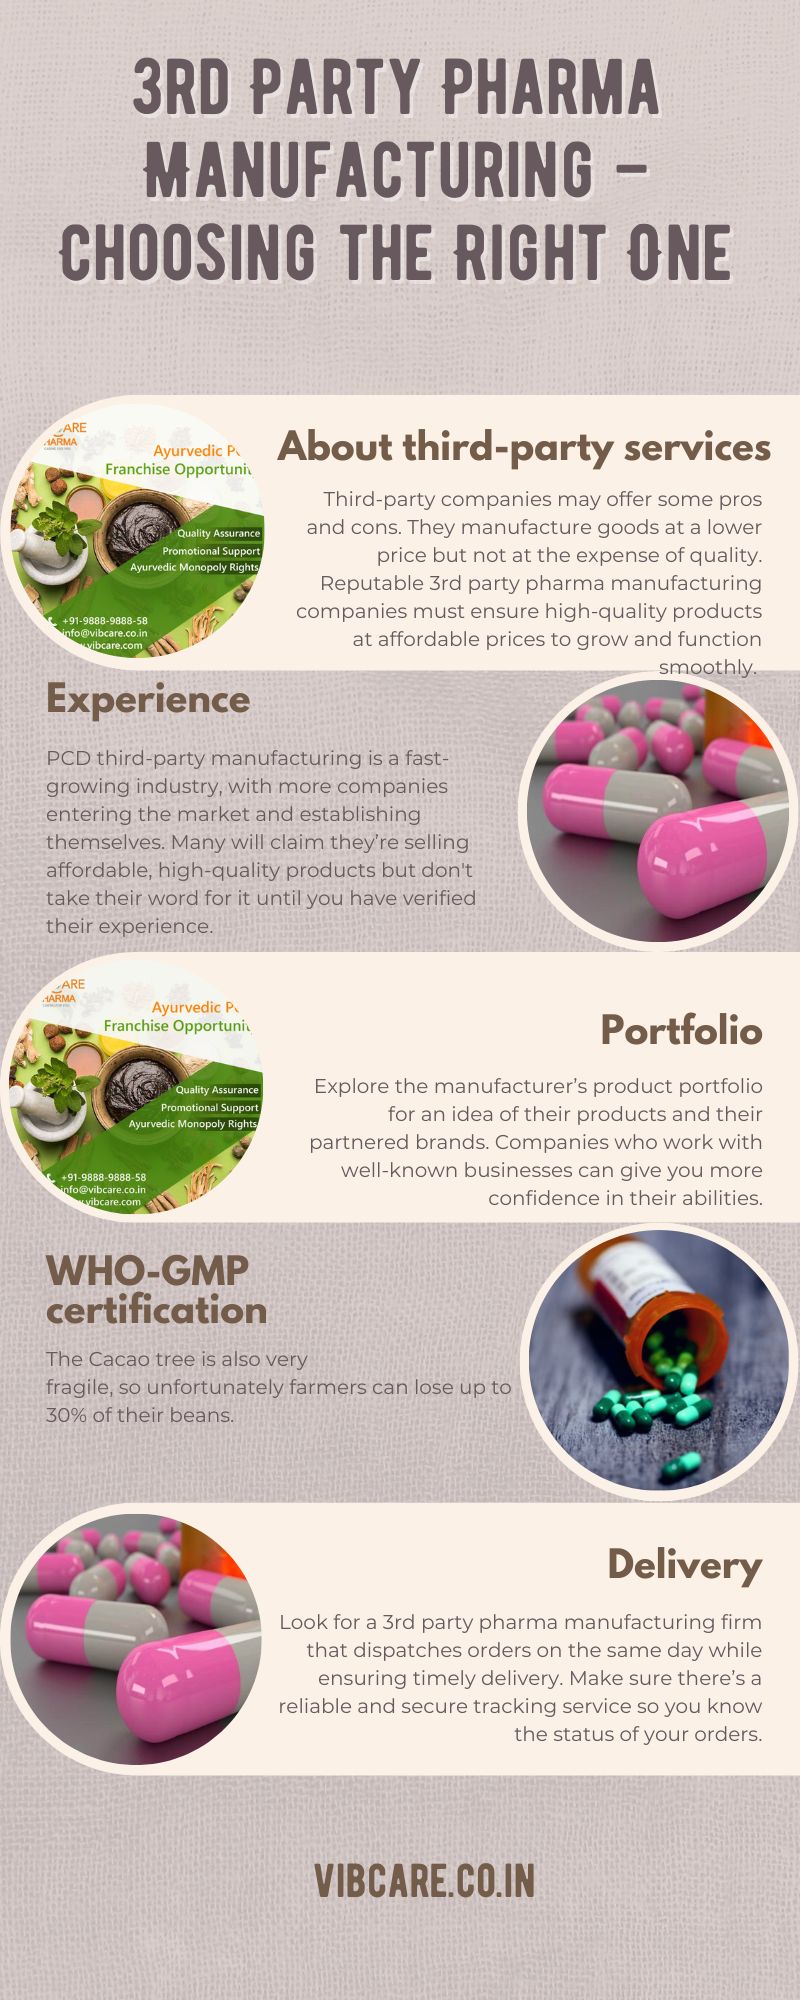 3rd Party Pharma Manufacturing – Choosing the Right One Many advantages are associated with 3rd party pharma manufacturing, with cost as the most crucial, particularly for businesses in developing countries.
https://vibcare.co.in/third-party-manufacturing-in-pharma/
 by vibcarepharma